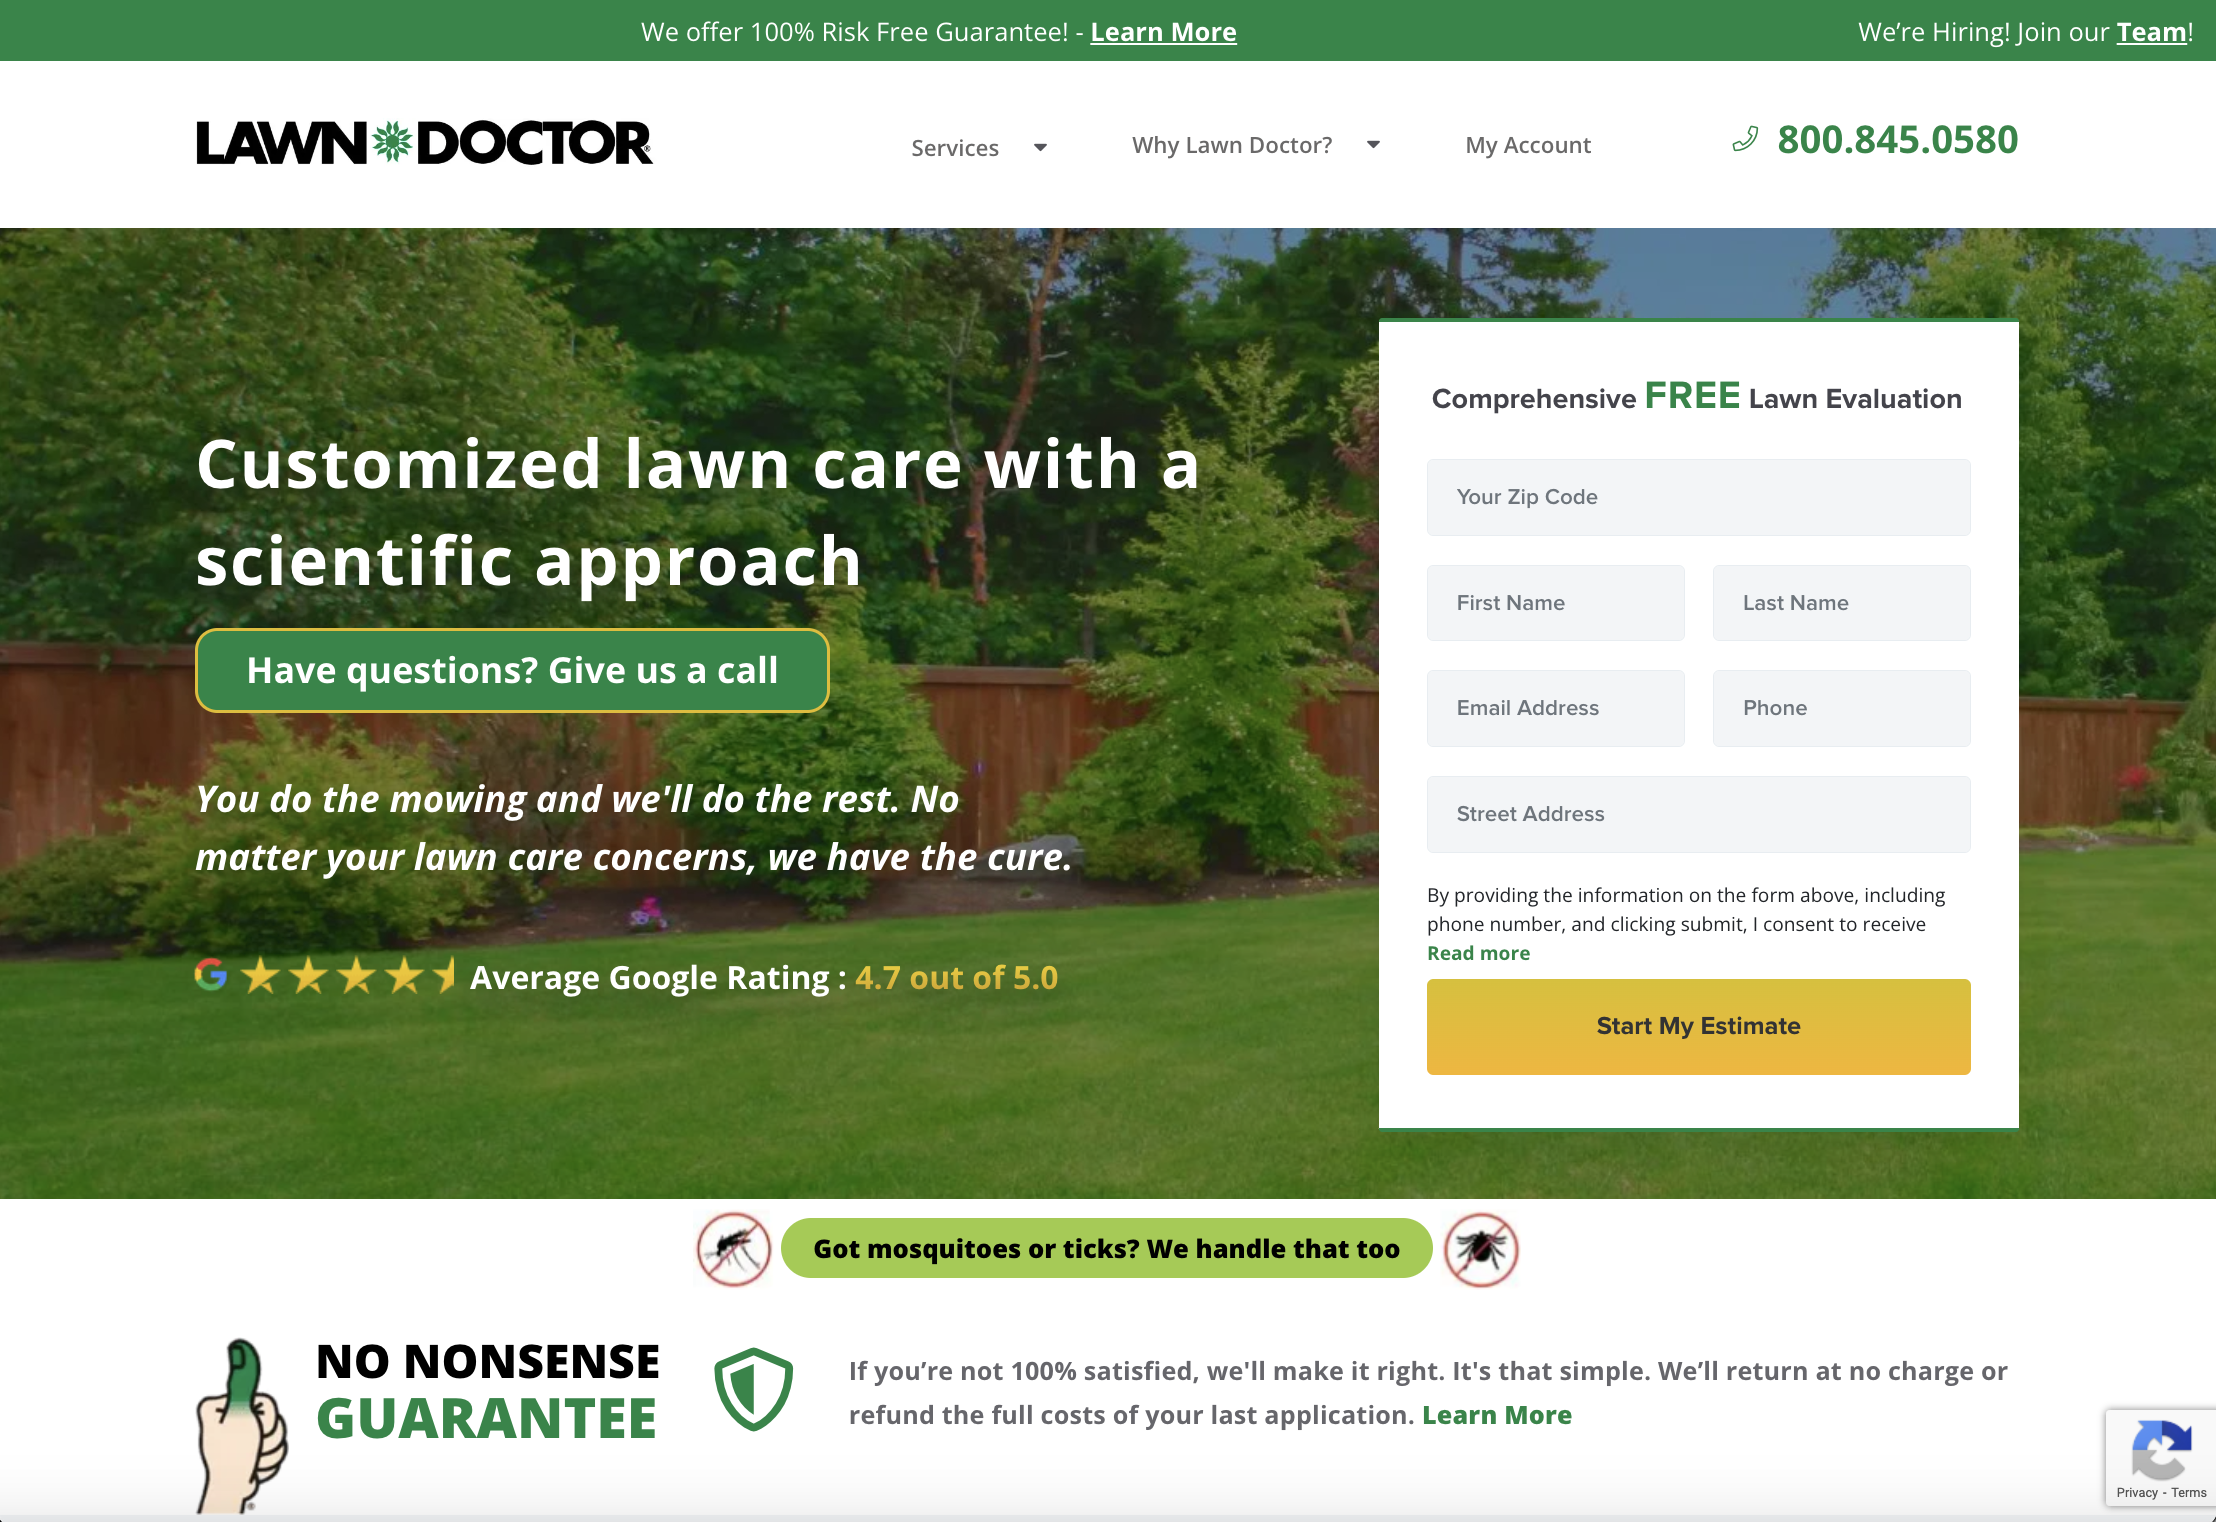 Lawn Doctor landing page